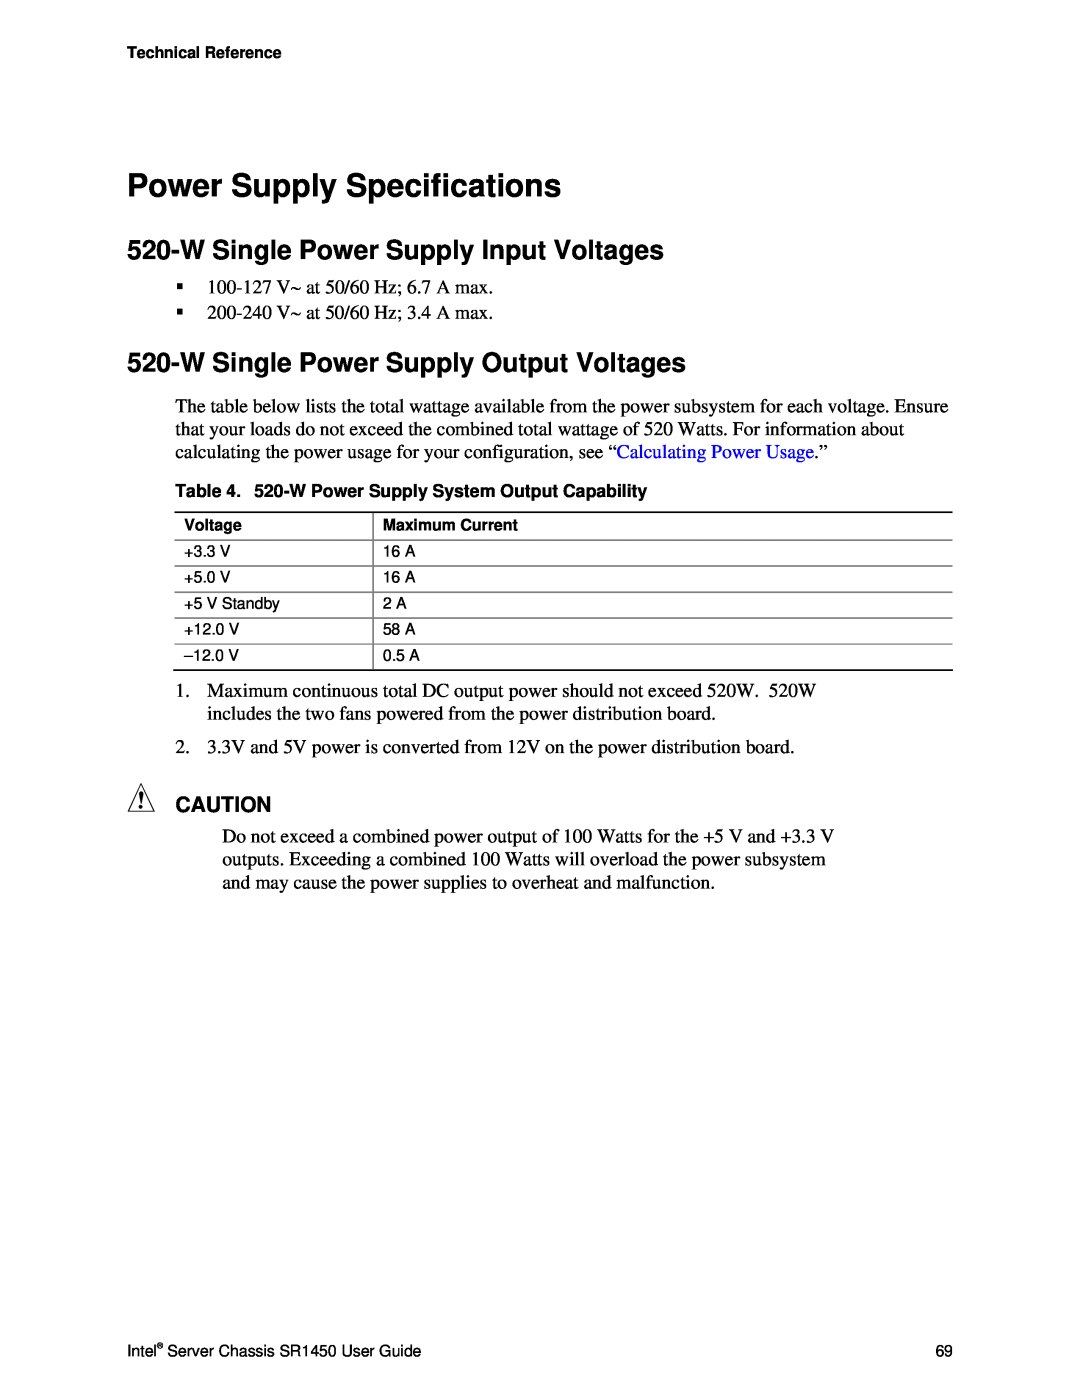 Intel SR1450 manual Power Supply Specifications, WSingle Power Supply Input Voltages, WSingle Power Supply Output Voltages 